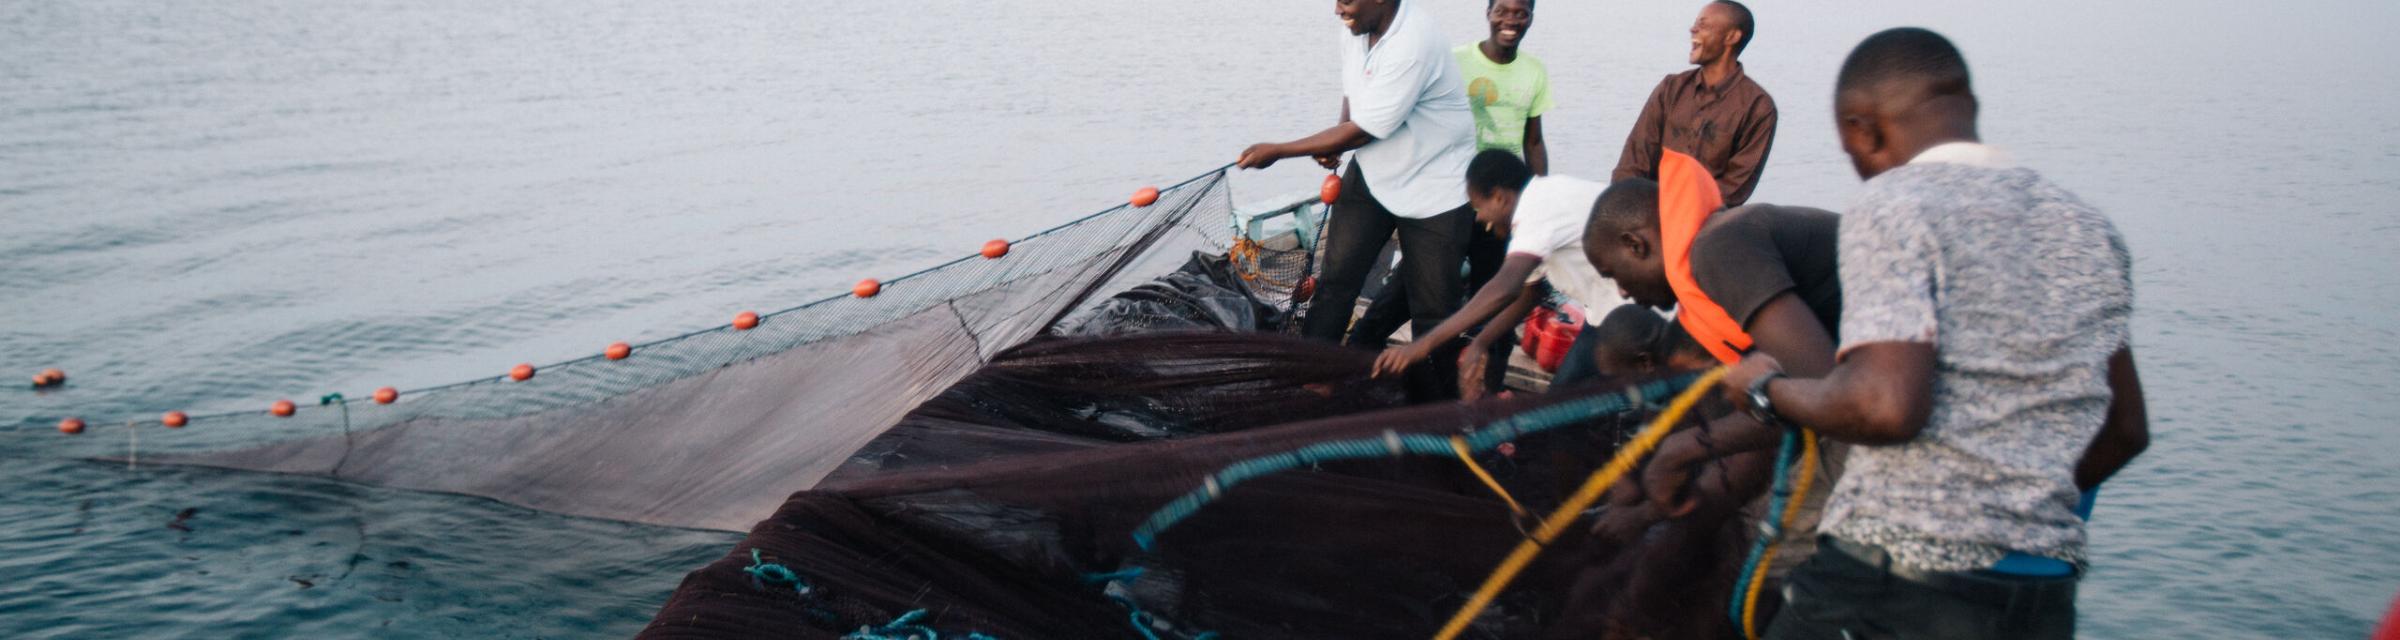 Church members and discipleship trainees from Kapembwa went fishing. Photo by Doseong Park